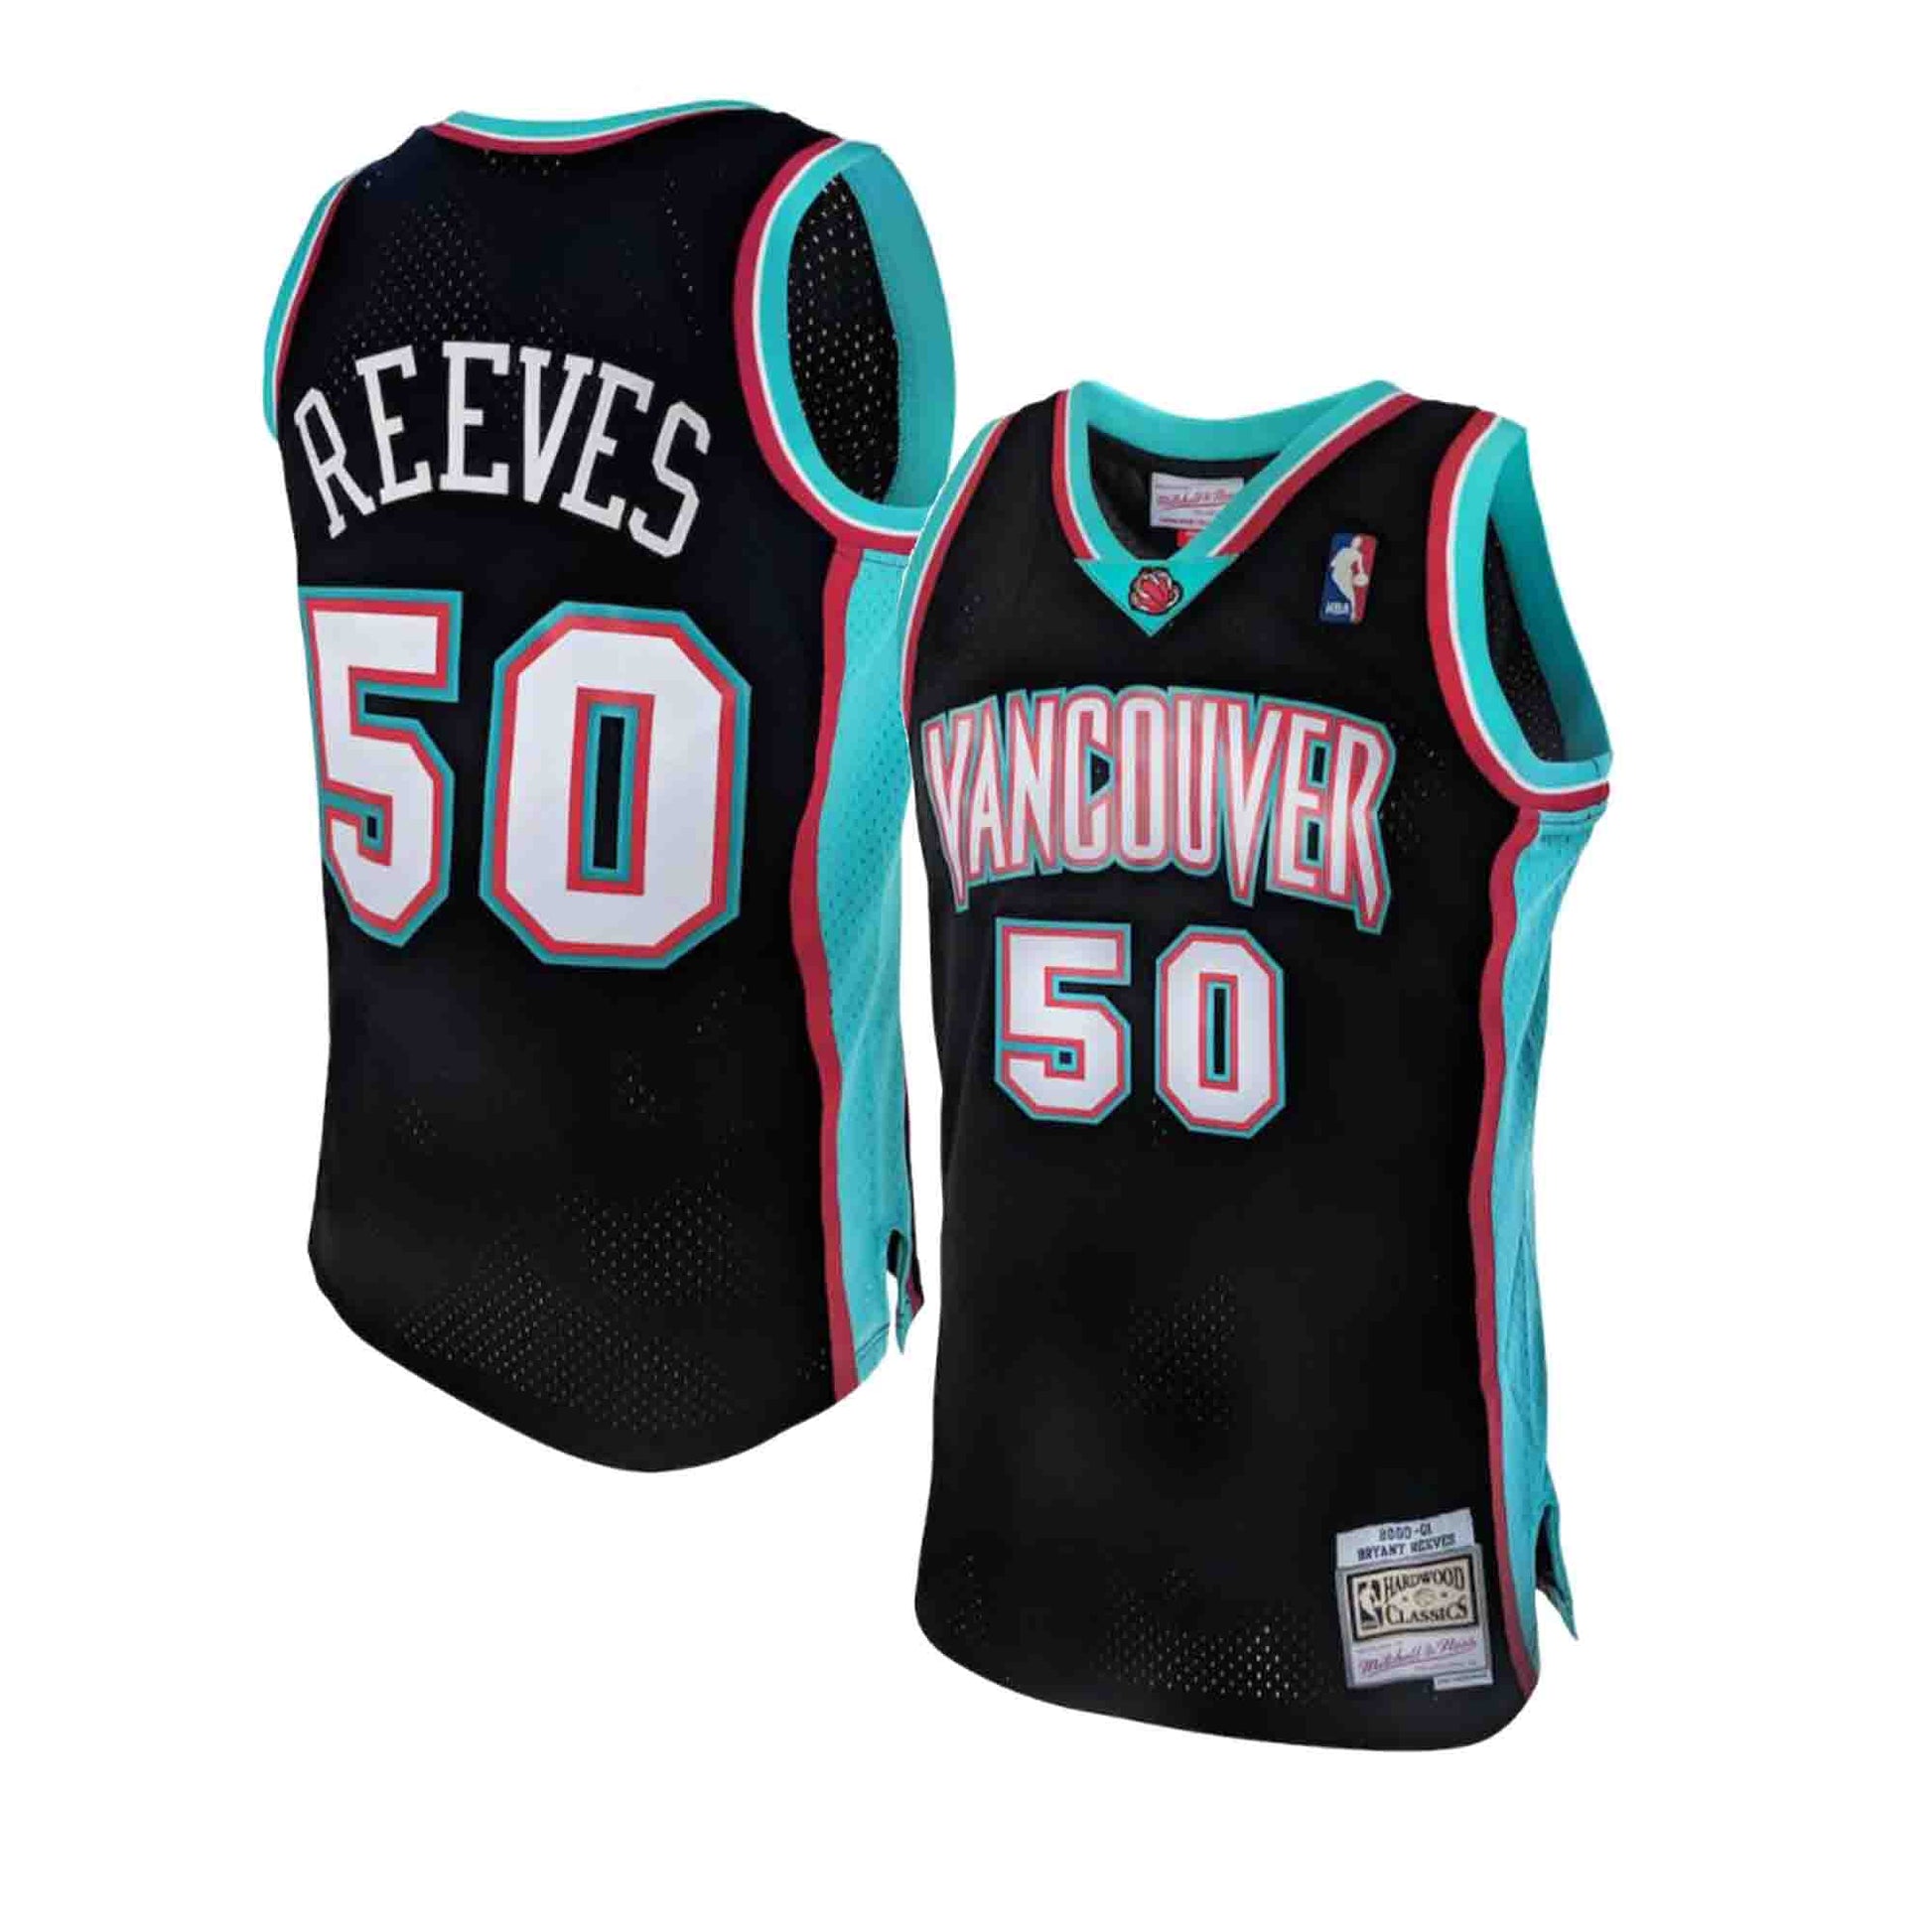 Official Vancouver Grizzlies Jerseys, City Jersey, Basketball